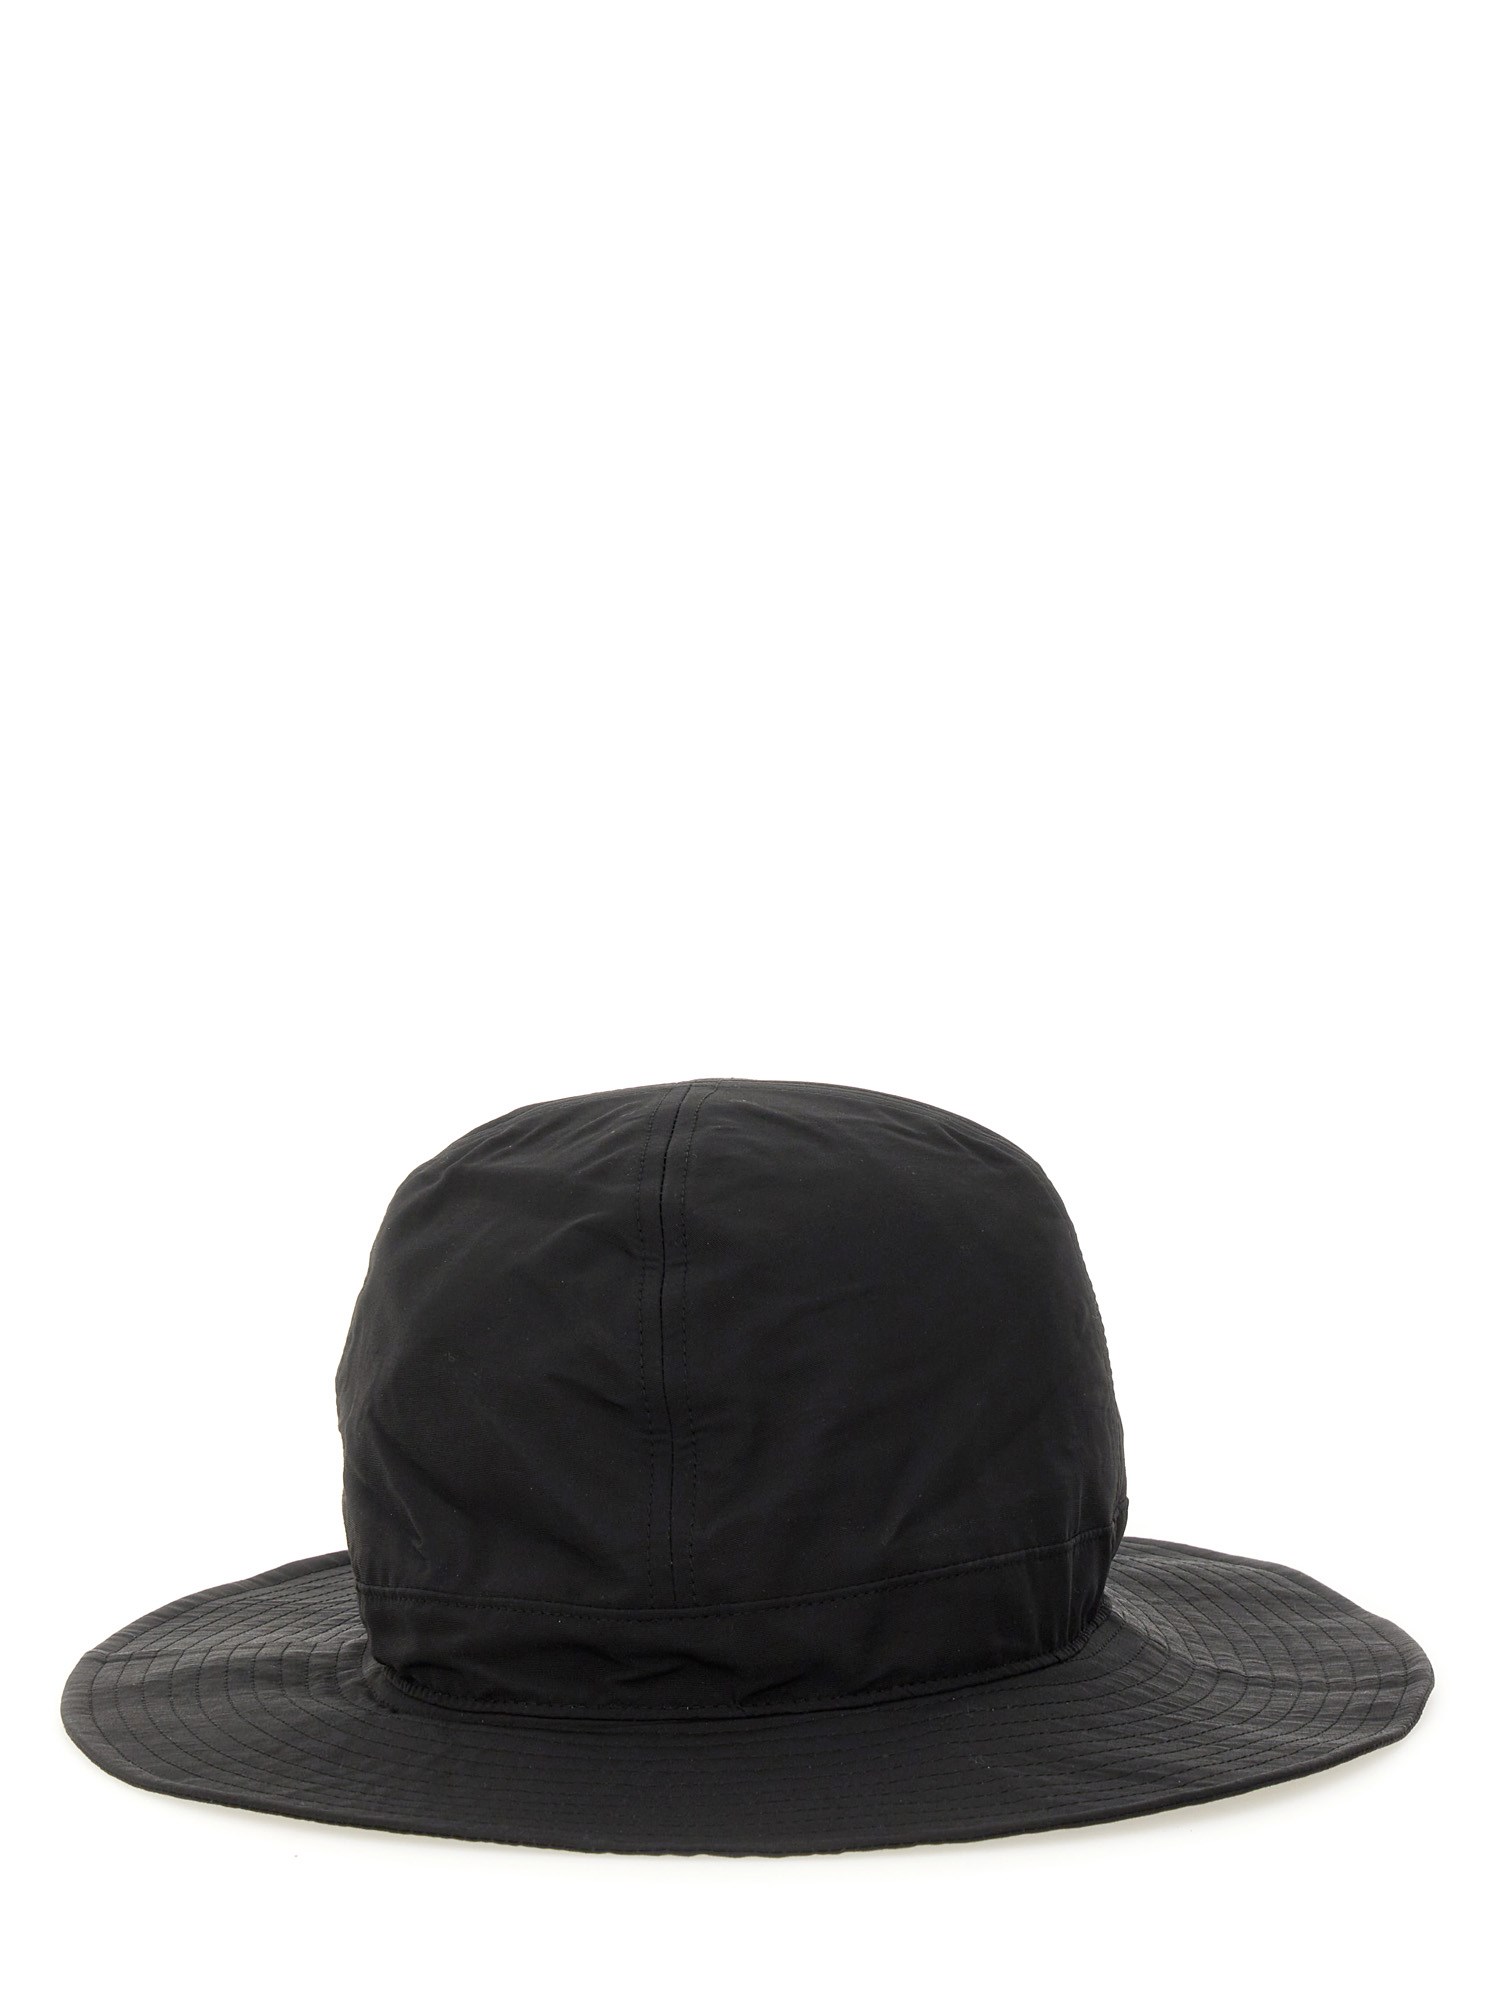 South2 West8 Hat Crusher In Black